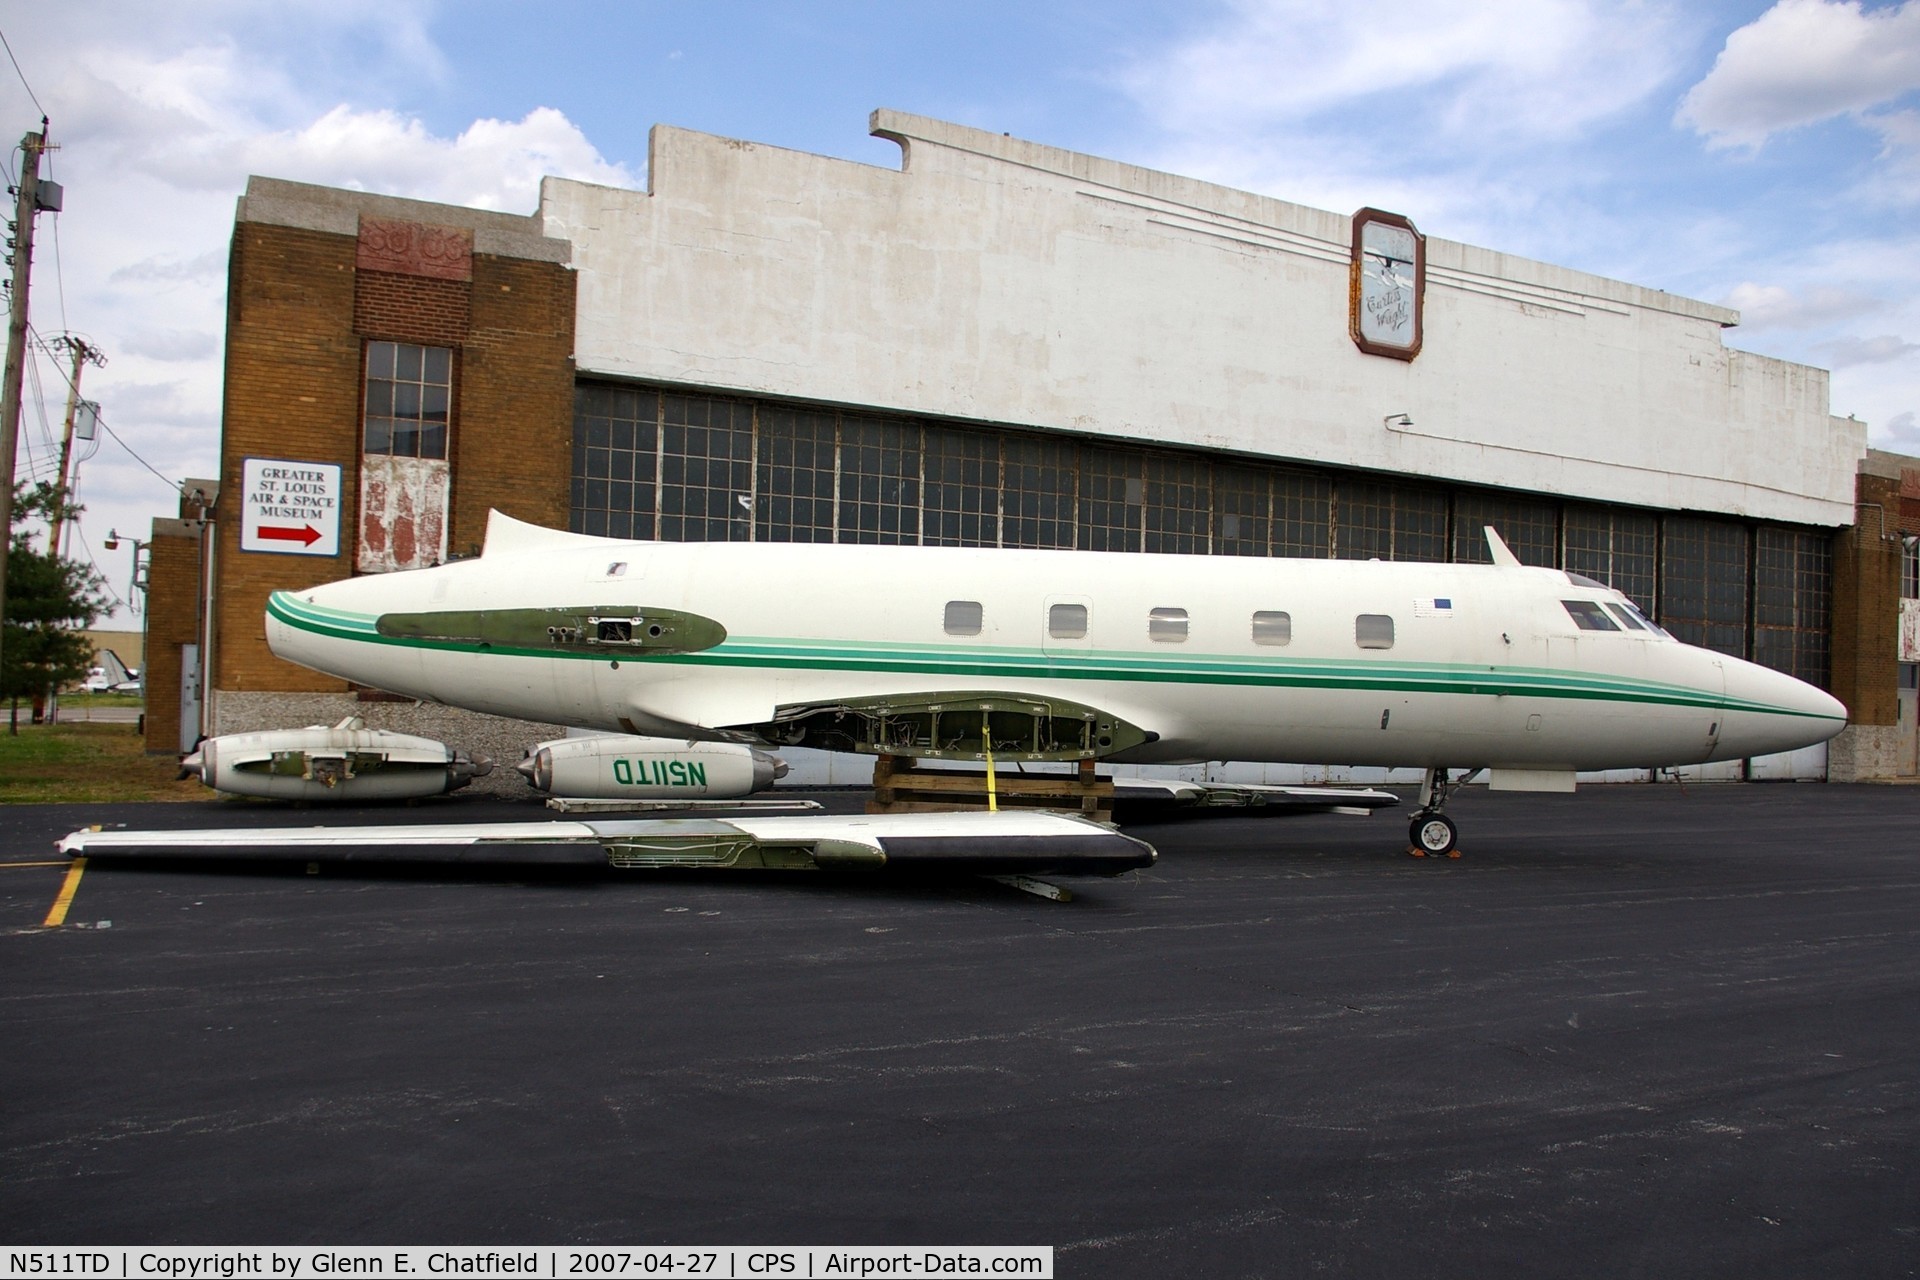 N511TD, 1969 Lockheed L-1329-23E JetStar C/N 5145, Once owned by Howard Hughes.  Awaiting reassembly at the Greater St. Louis Aviation Museum